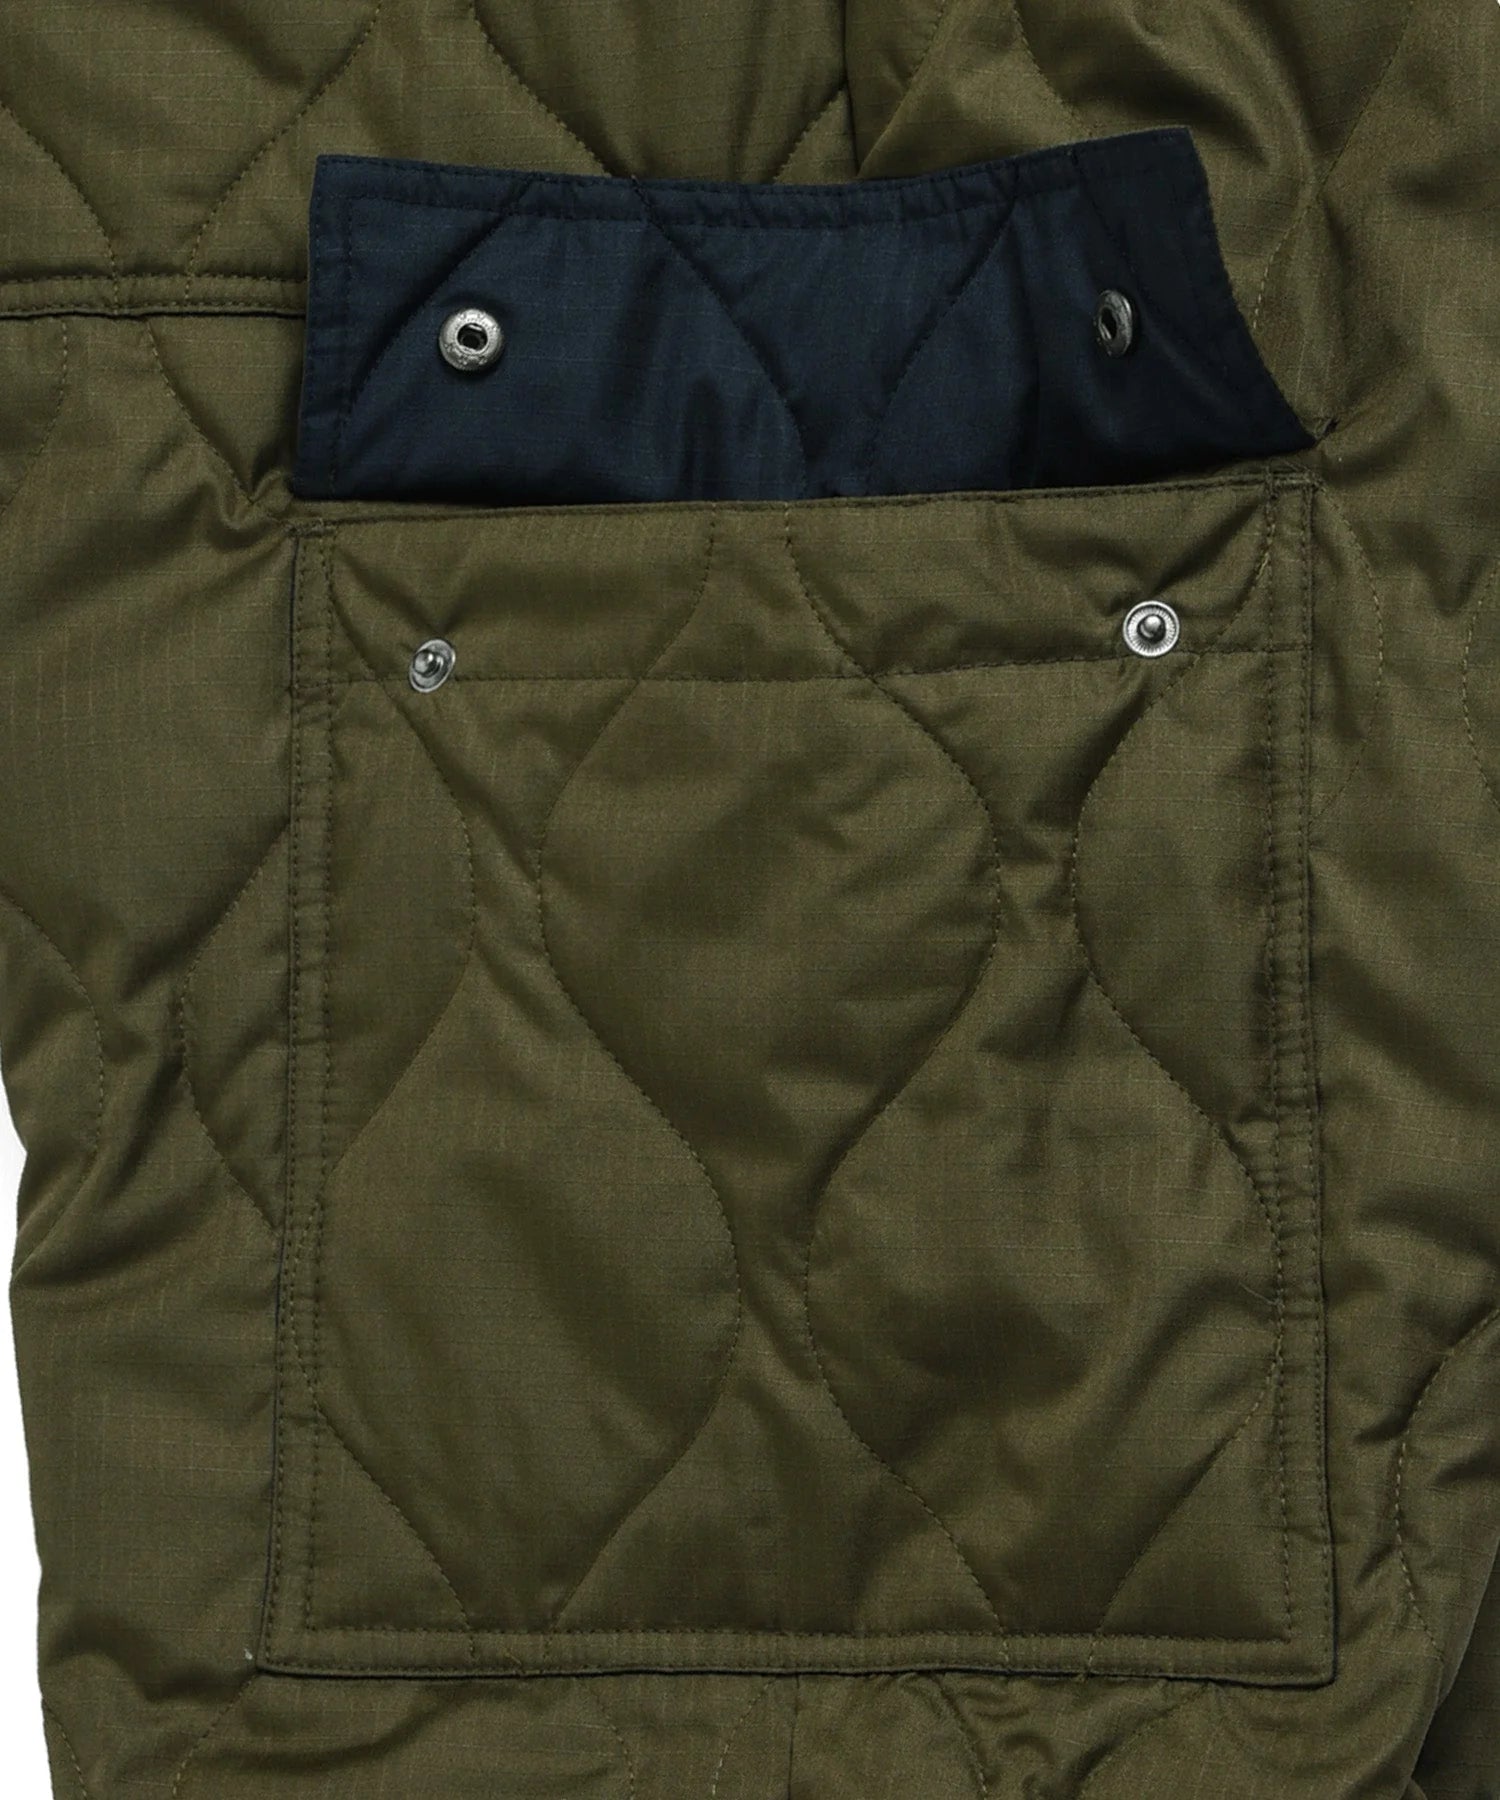 TAION / MILITARY CARGO DOWN PANTS 【UNISEX】